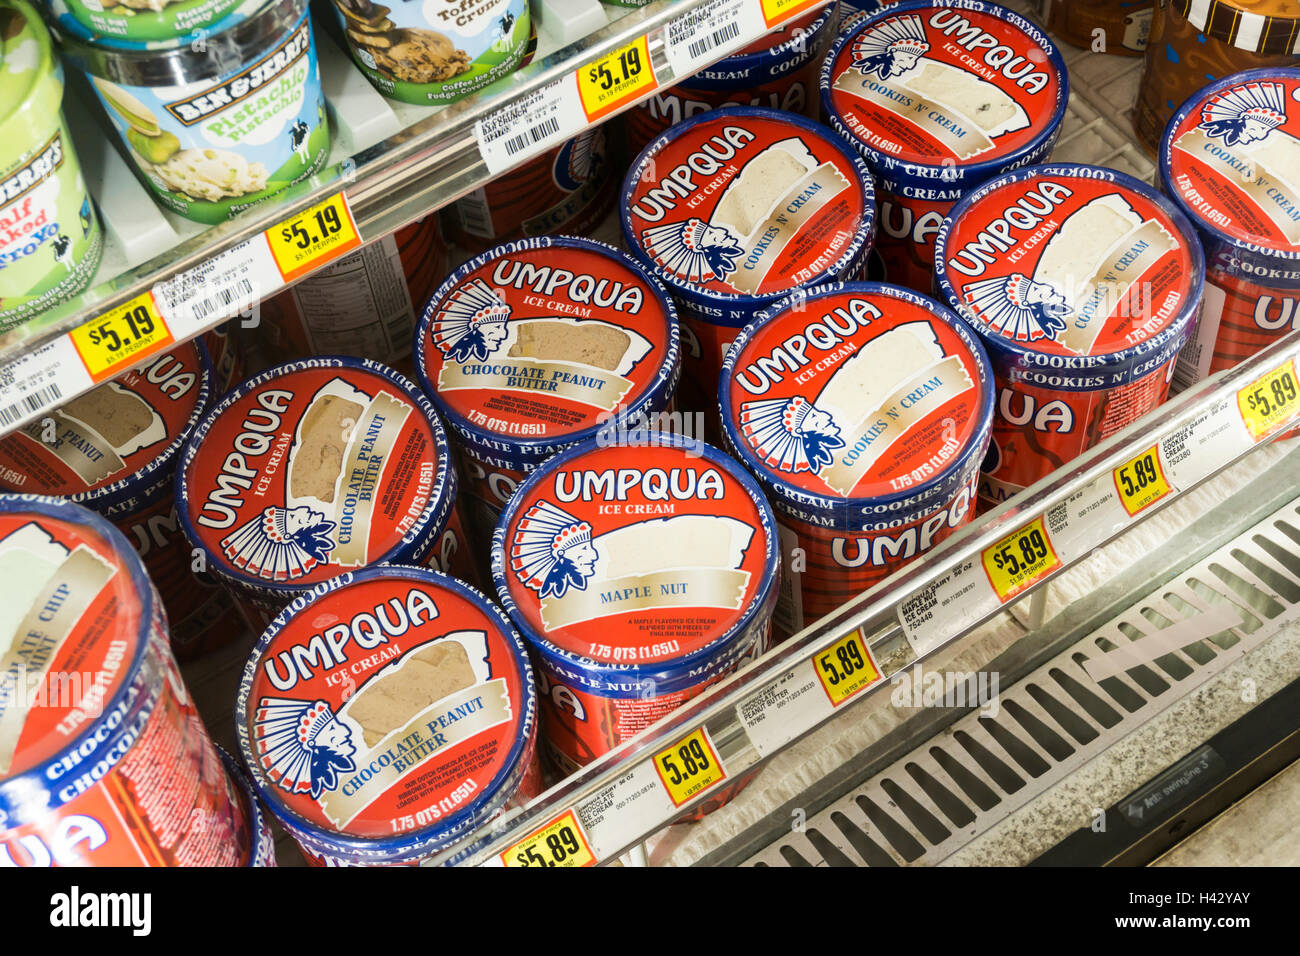 Tubs of Umpqua ice cream from Oregon in an American supermarket cold cabinet. Stock Photo